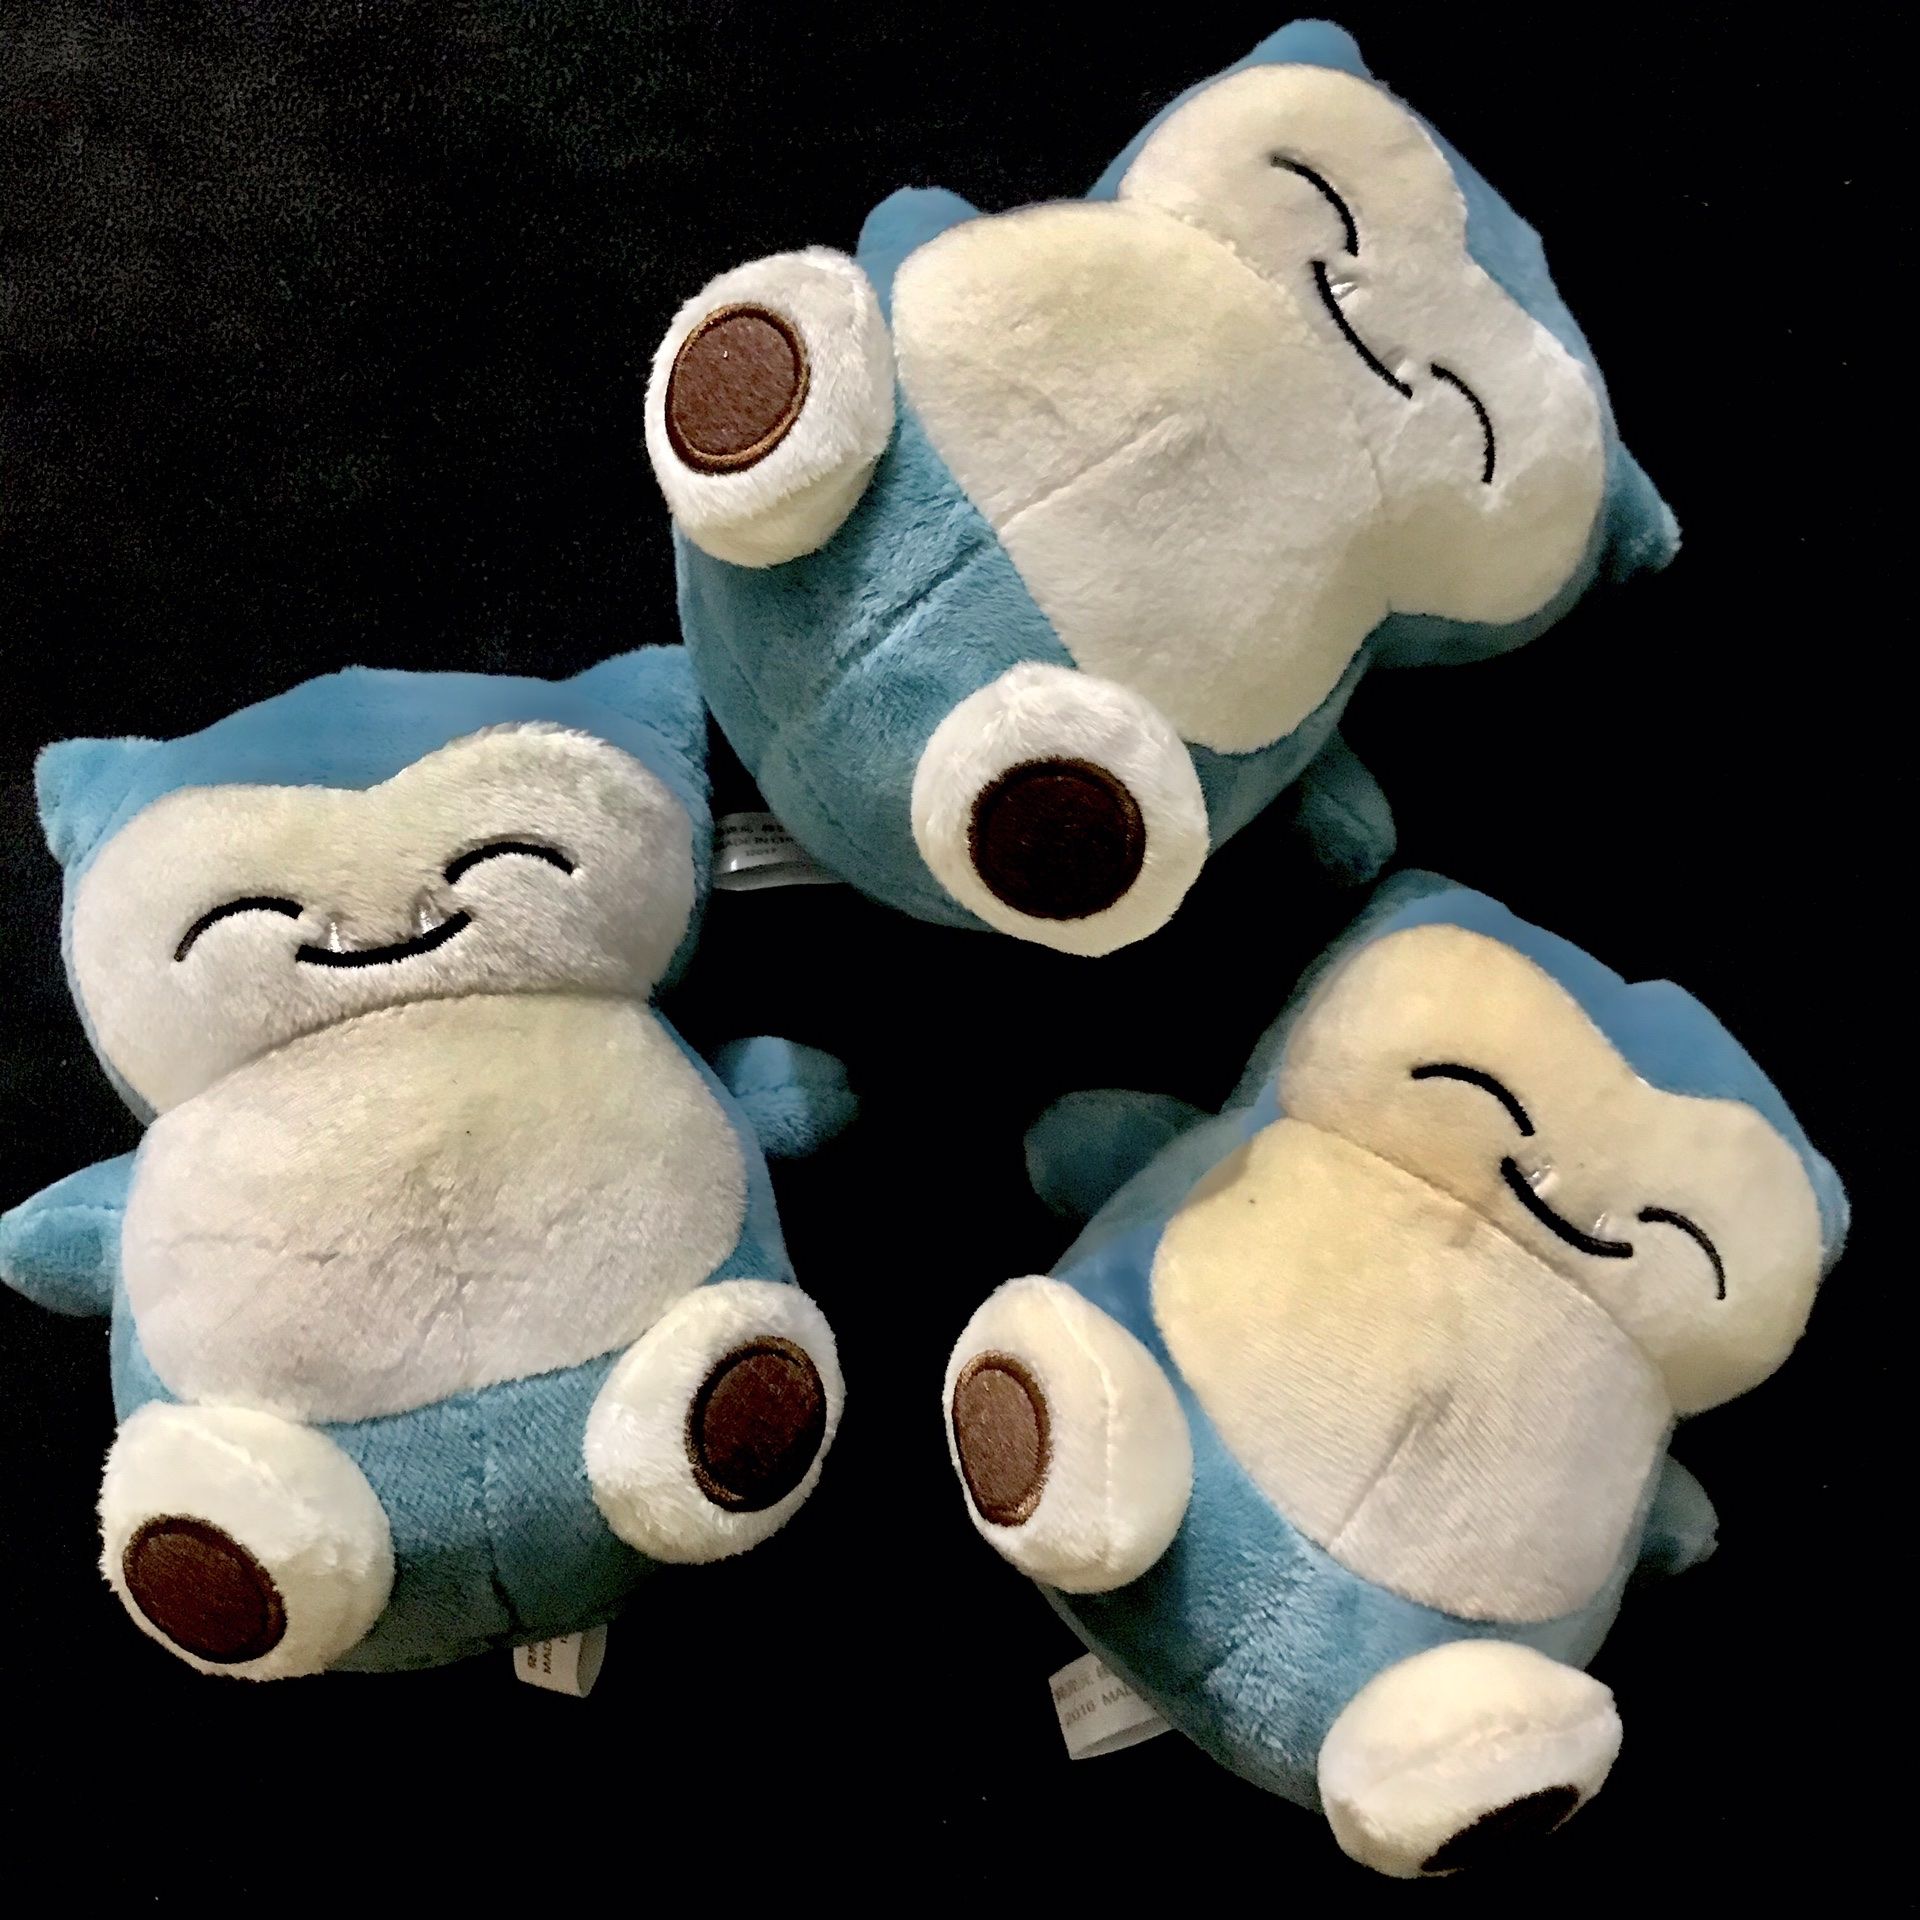 snorlax plush 5 inches tall (Only 4 Left!)